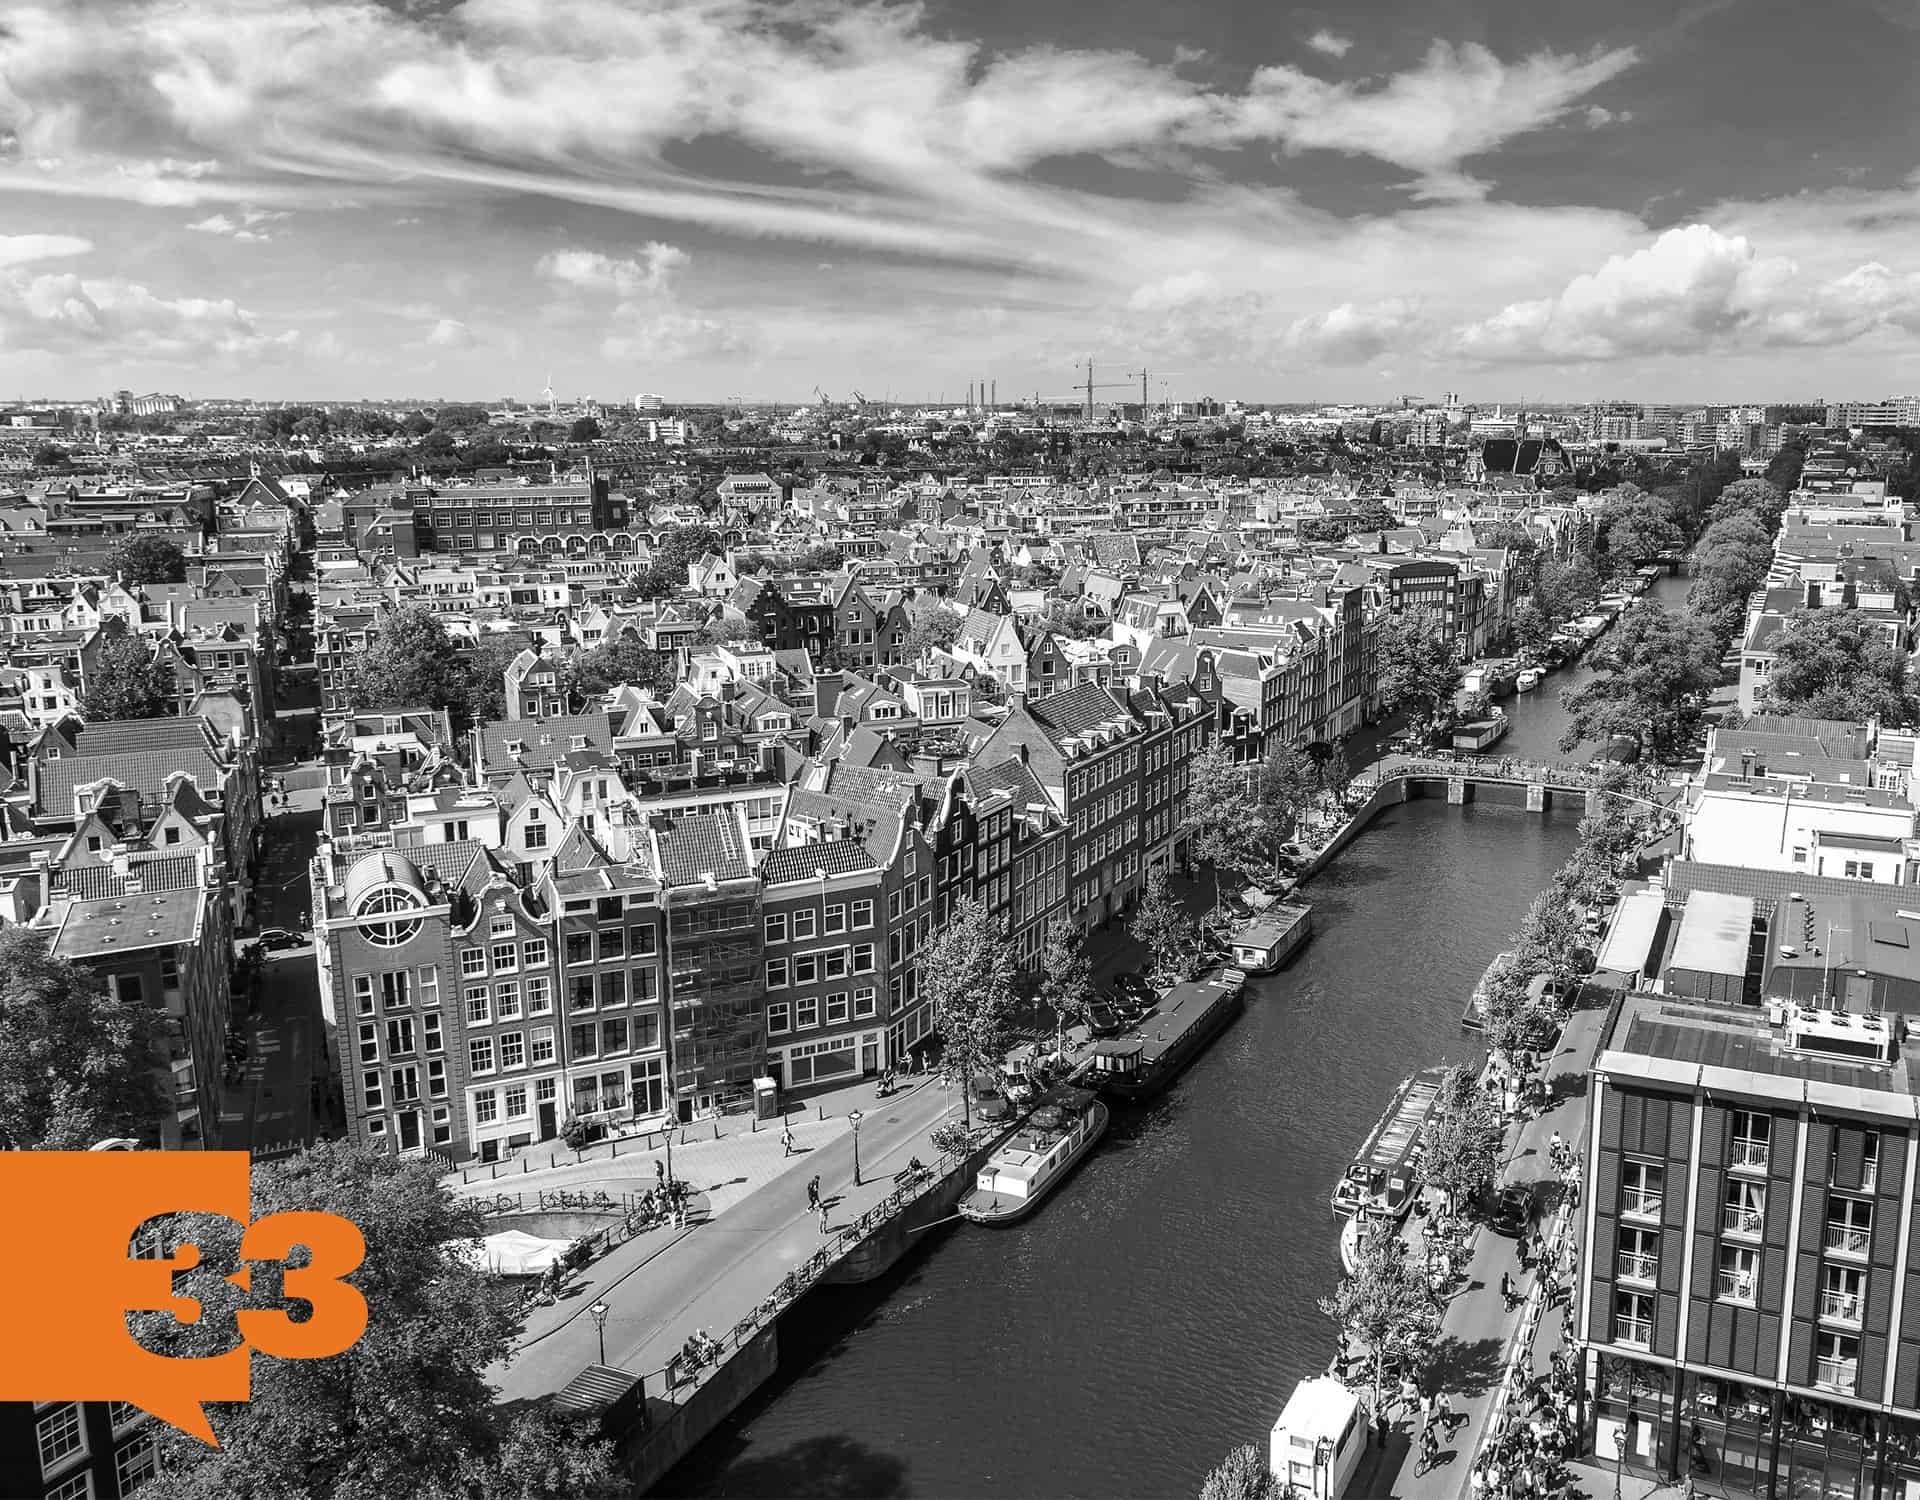 33Floors Heads to YASC 2017 in Amsterdam